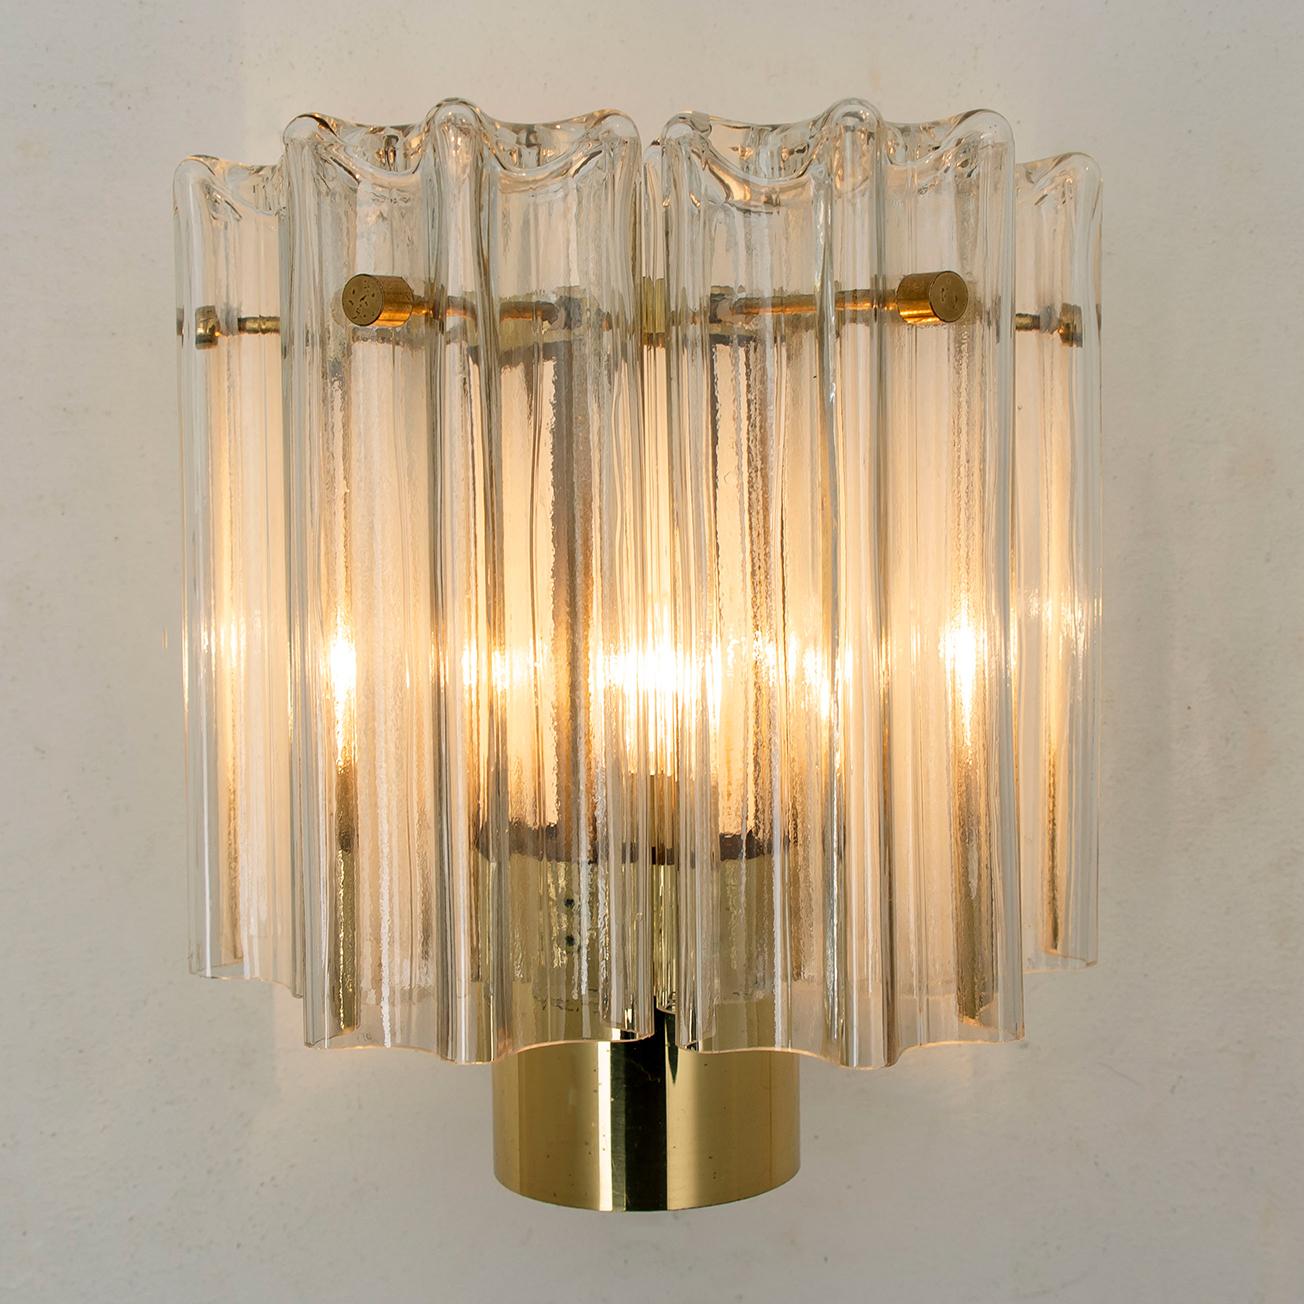 Pair of J.T Kalmar Clear Glass and Brass Wall Lights, Austria, 1960 For Sale 5